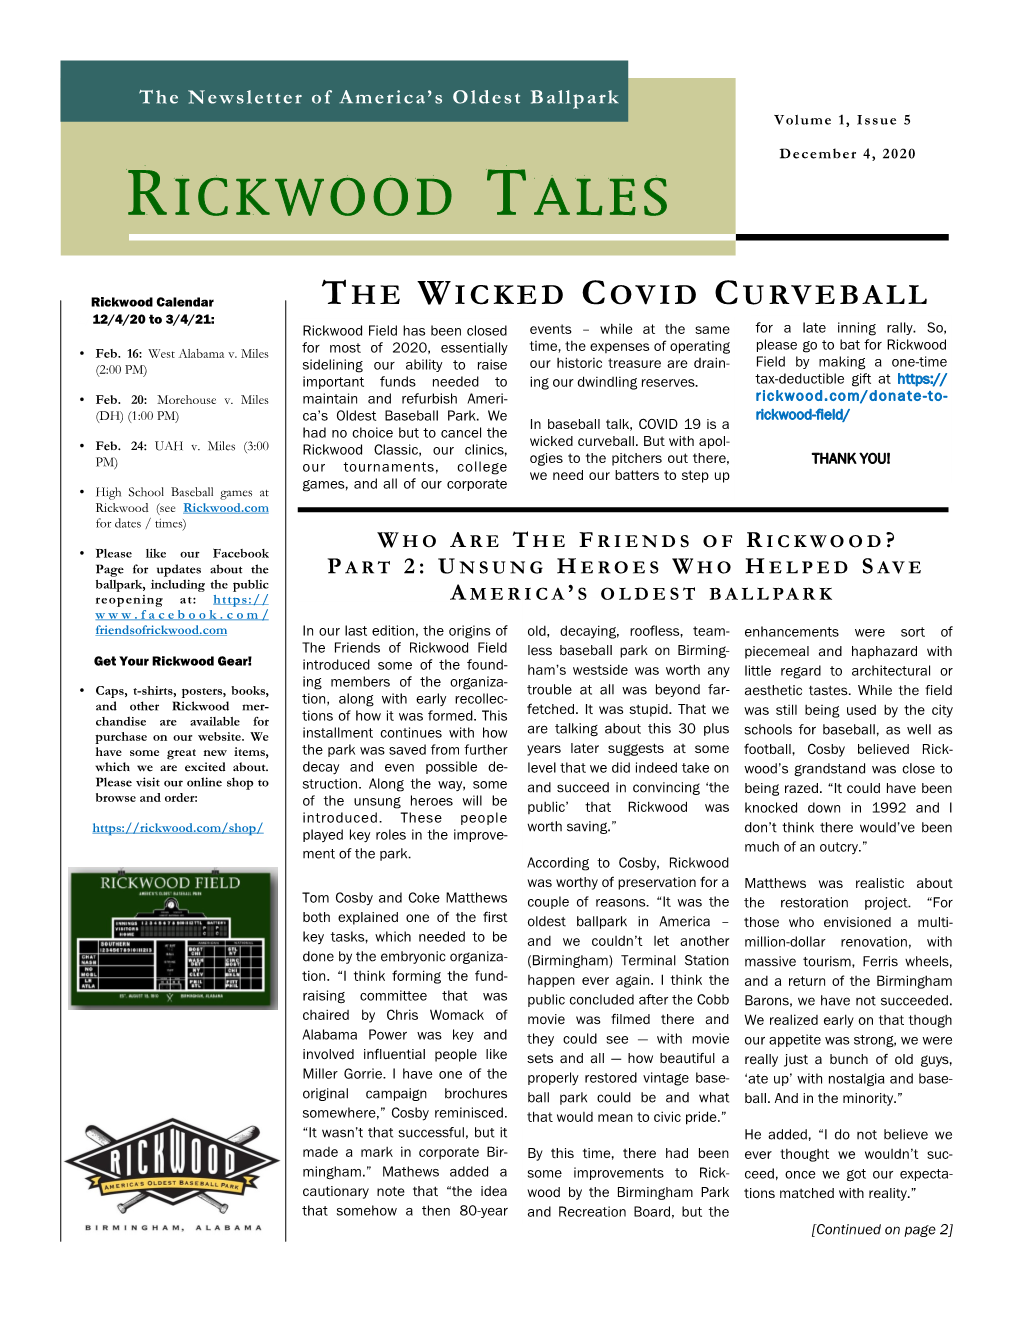 Rickwood Tales Page 3